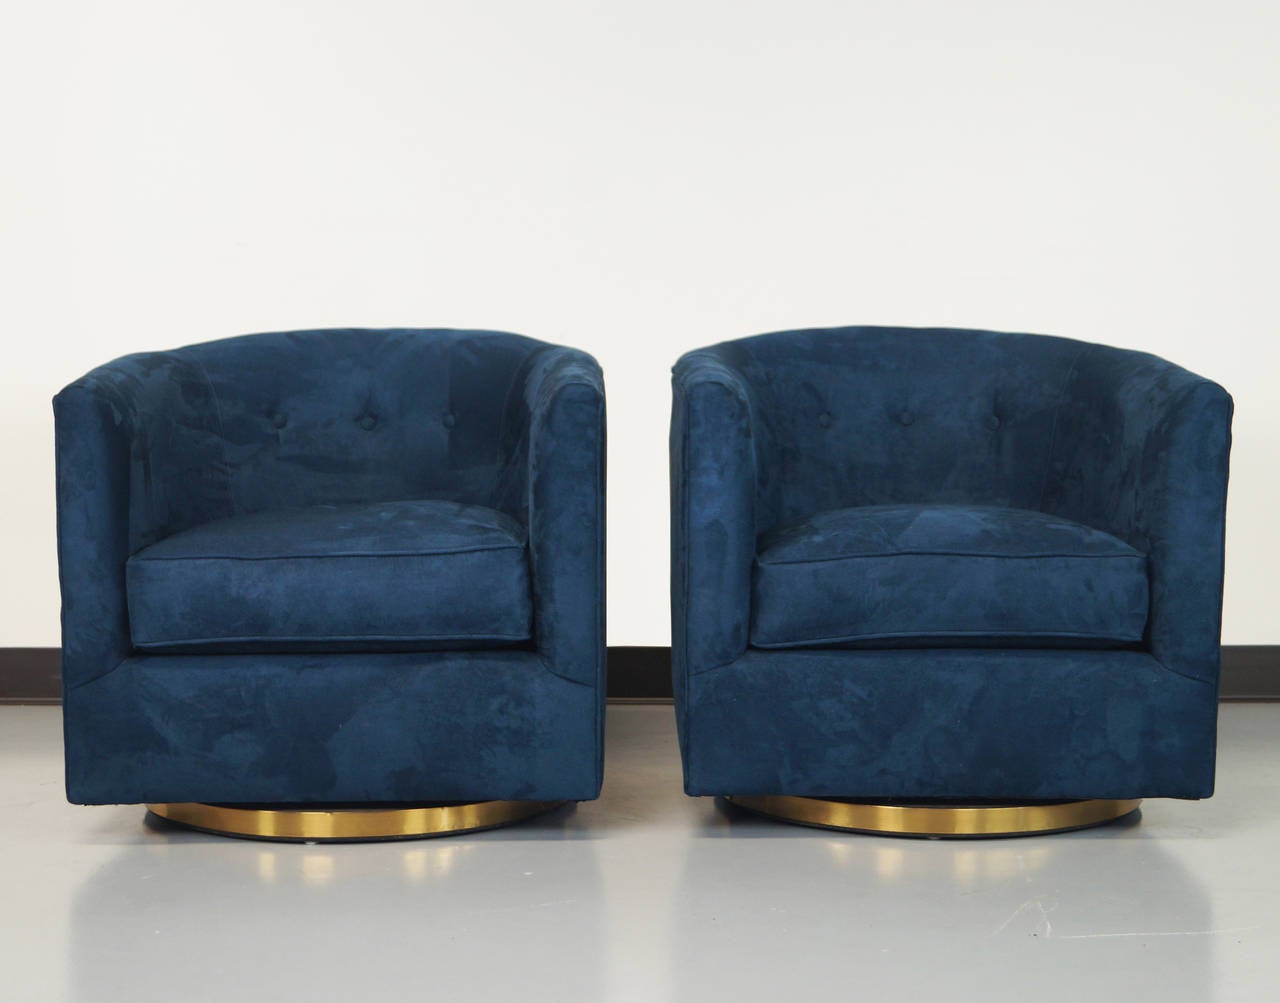 A pair of stunning brass swivel chairs attributed to Milo Baughman.